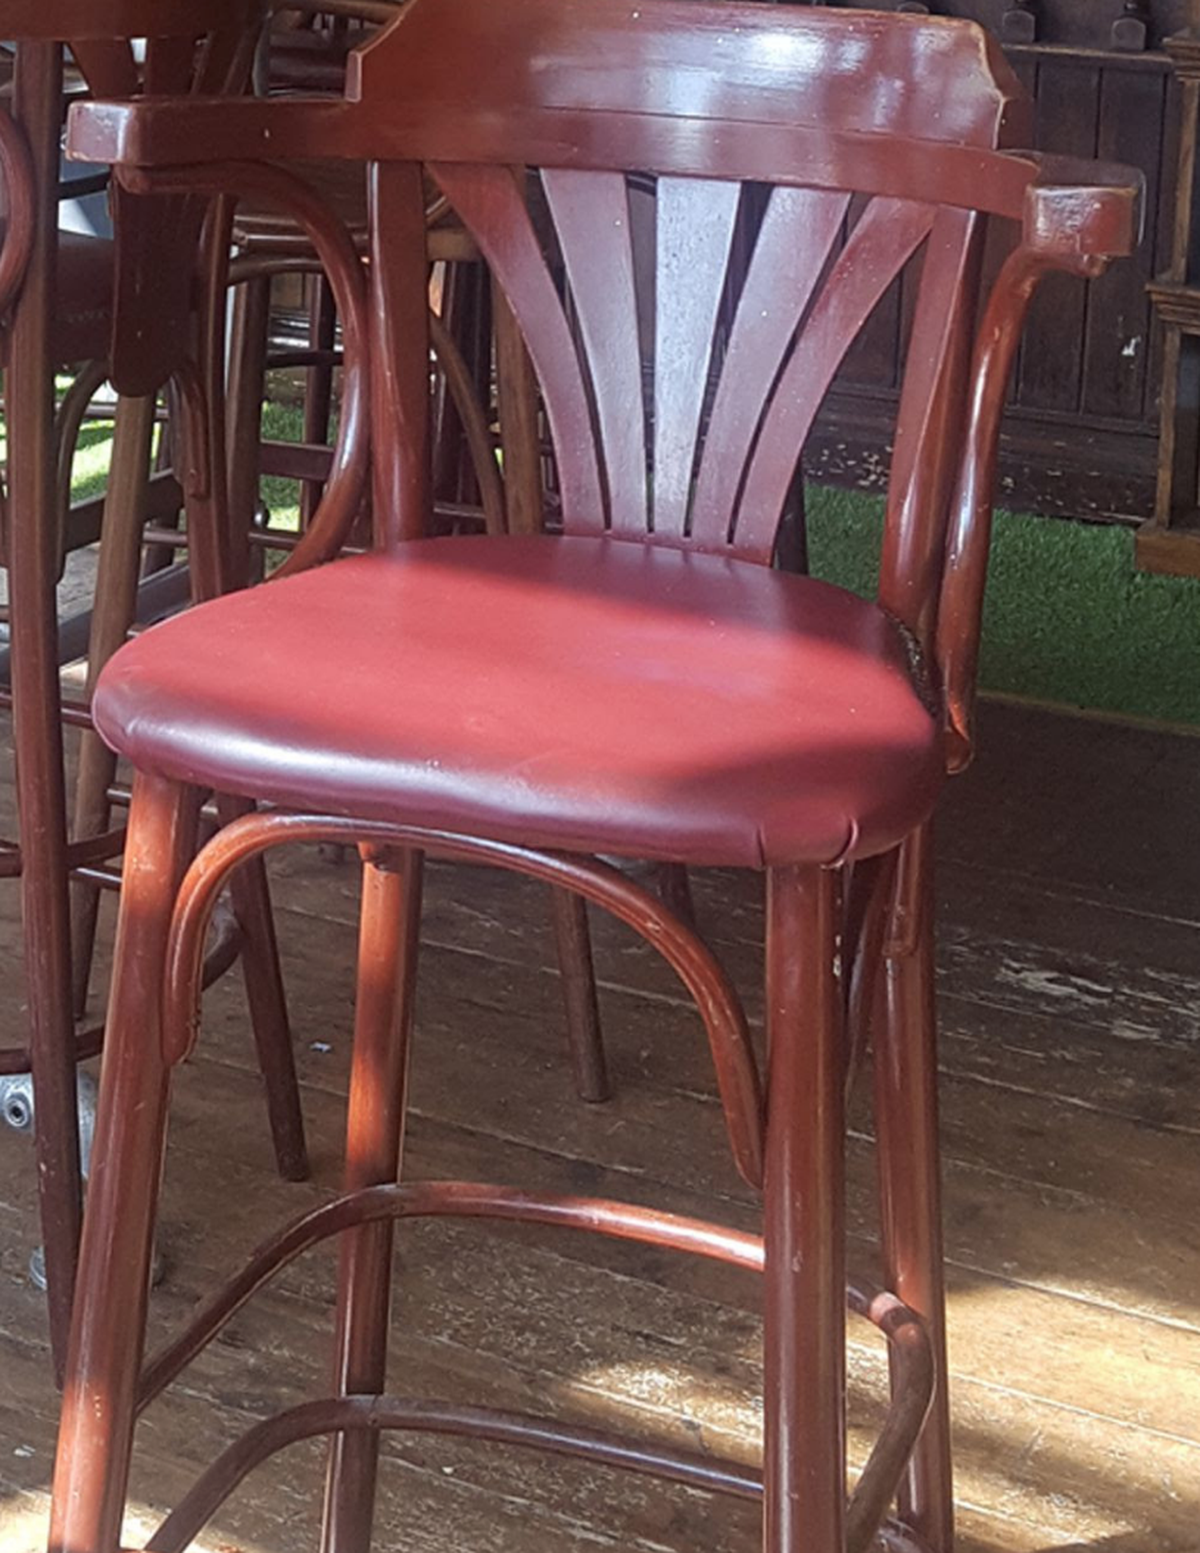 Secondhand Chairs and Tables | Pub and Bar Furniture | 6x ...